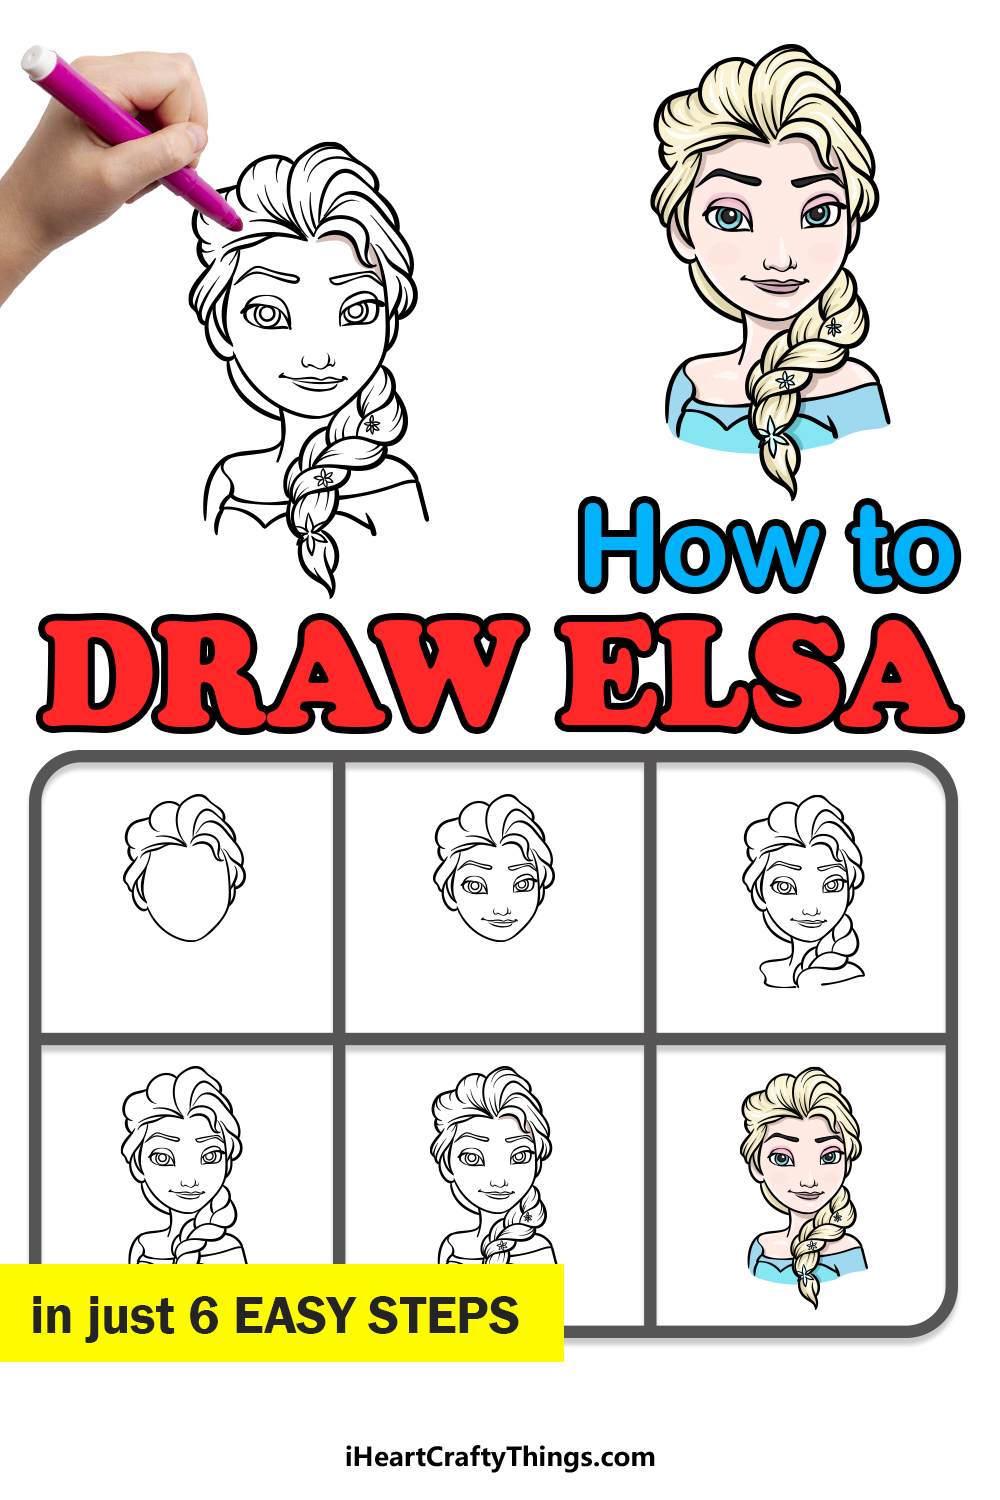 how to draw Elsa in 6 easy steps